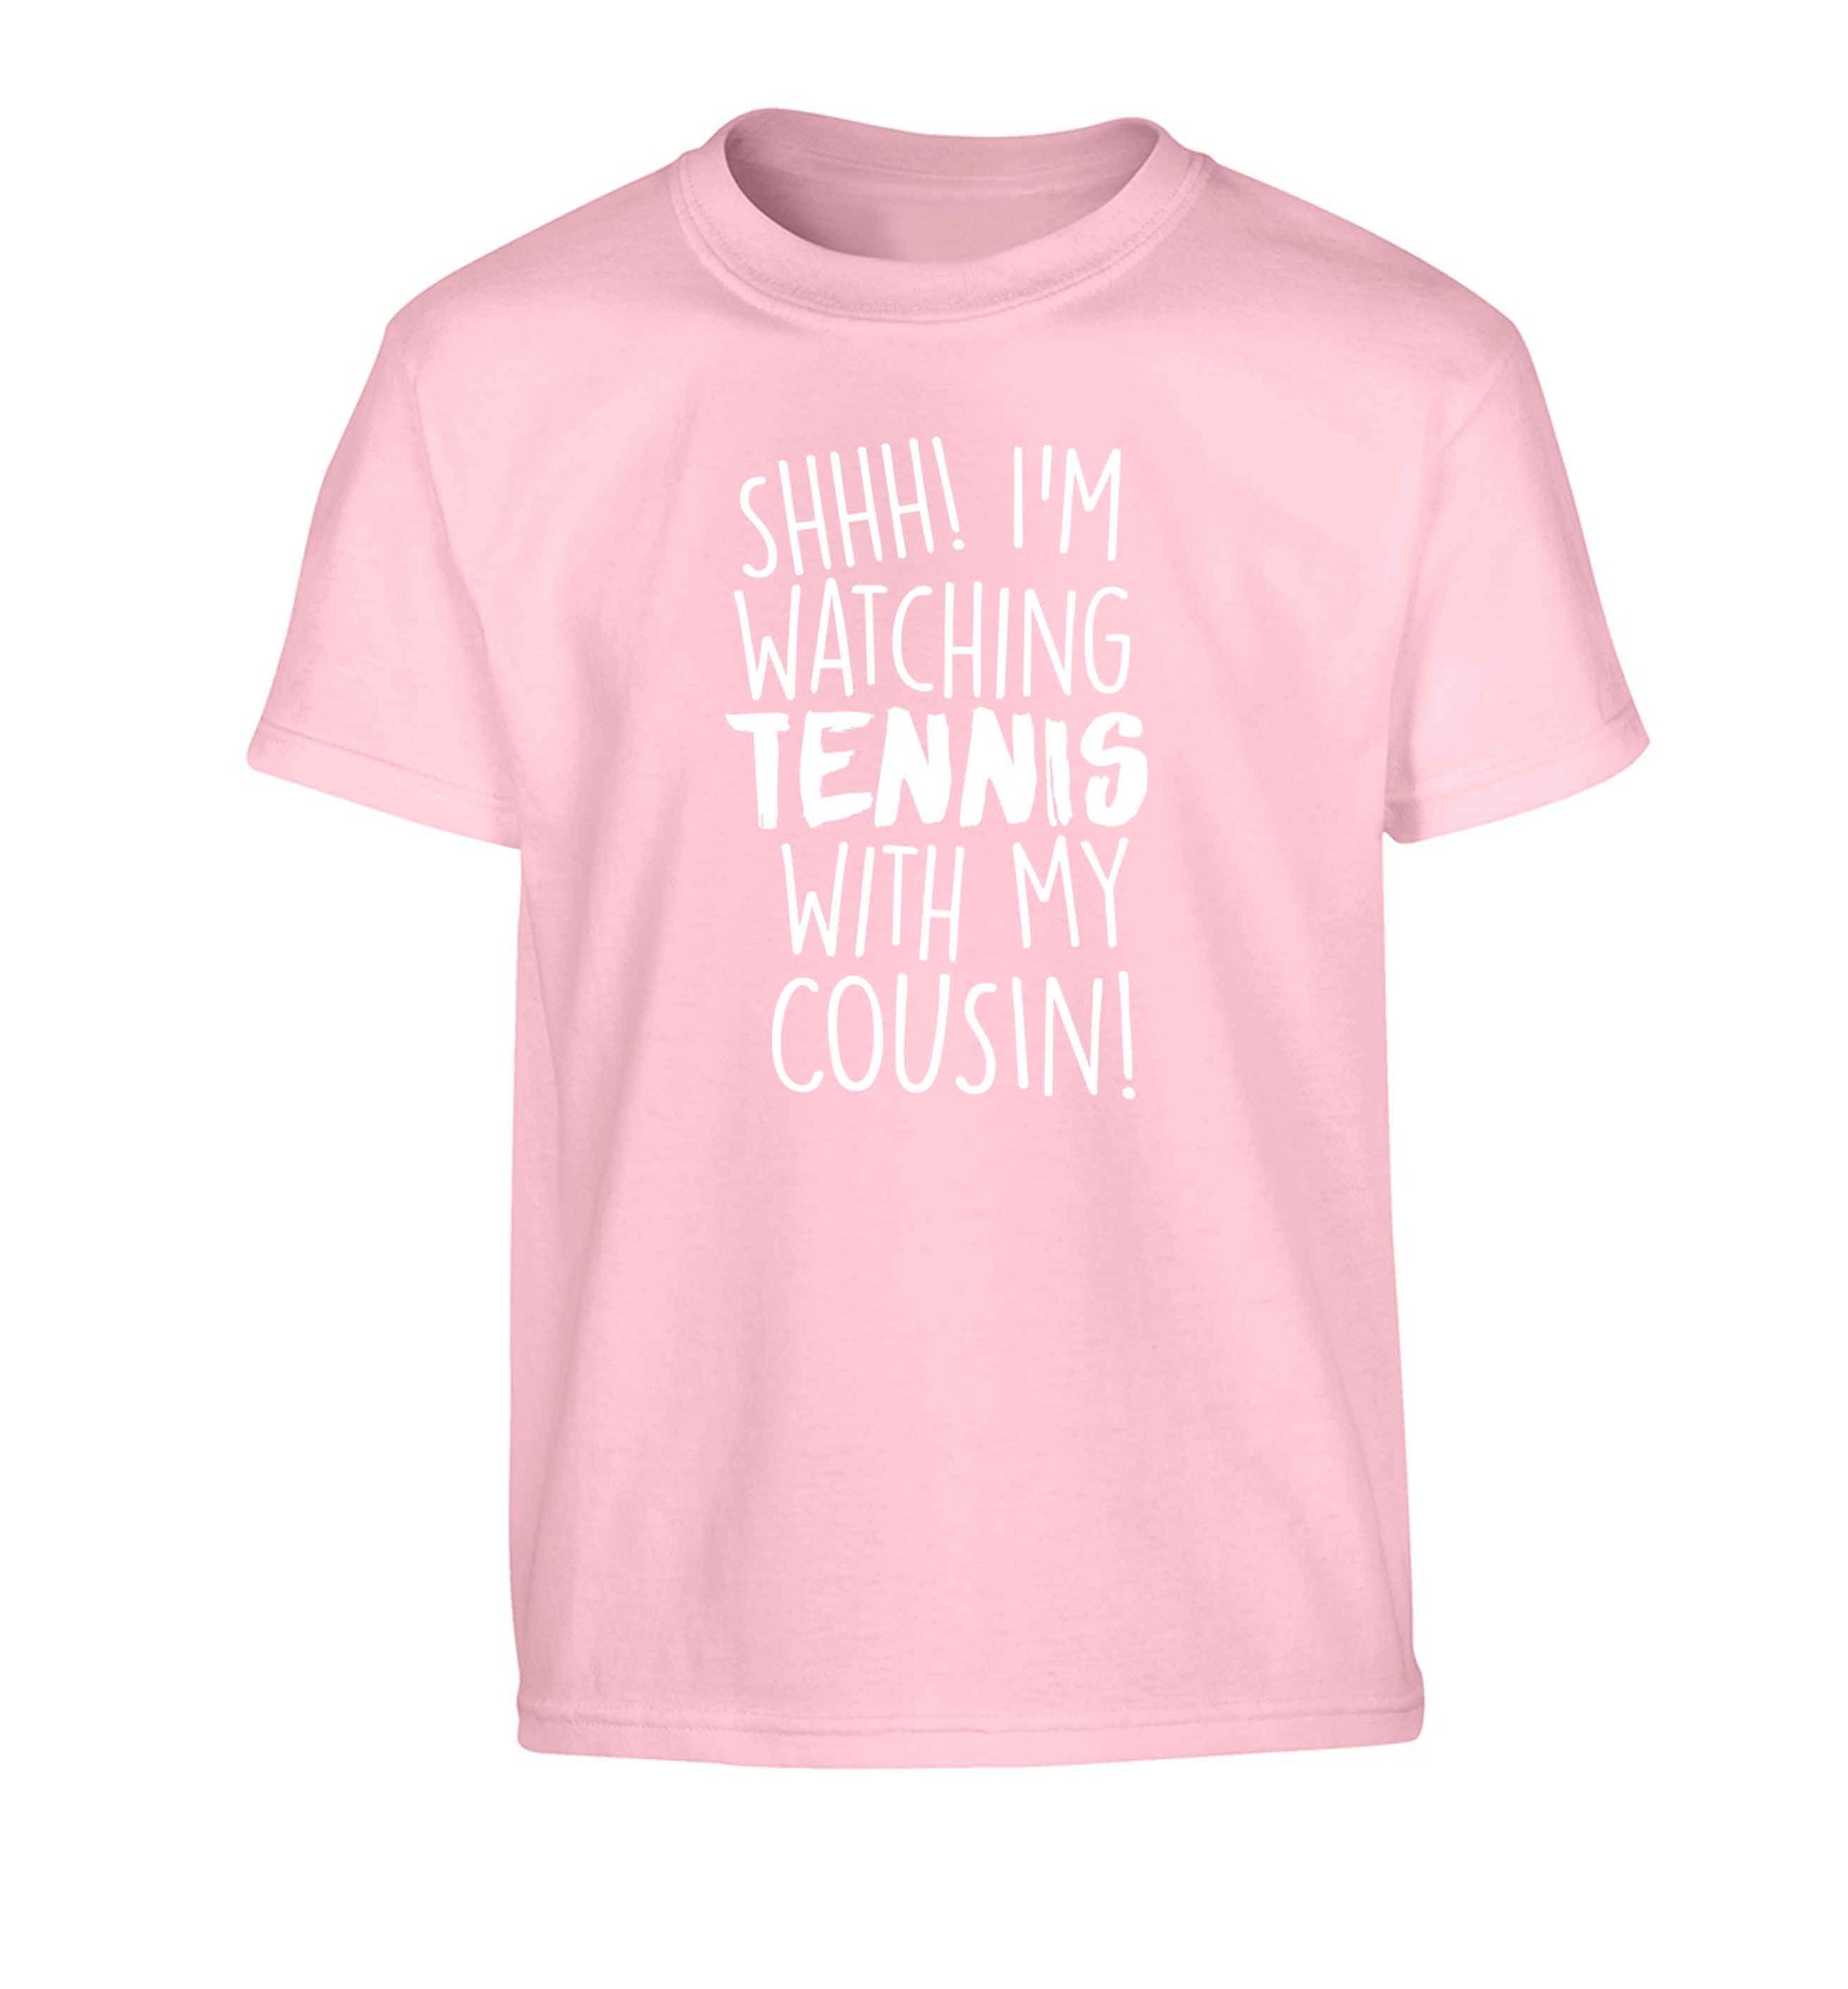 Shh! I'm watching tennis with my cousin! Children's light pink Tshirt 12-13 Years